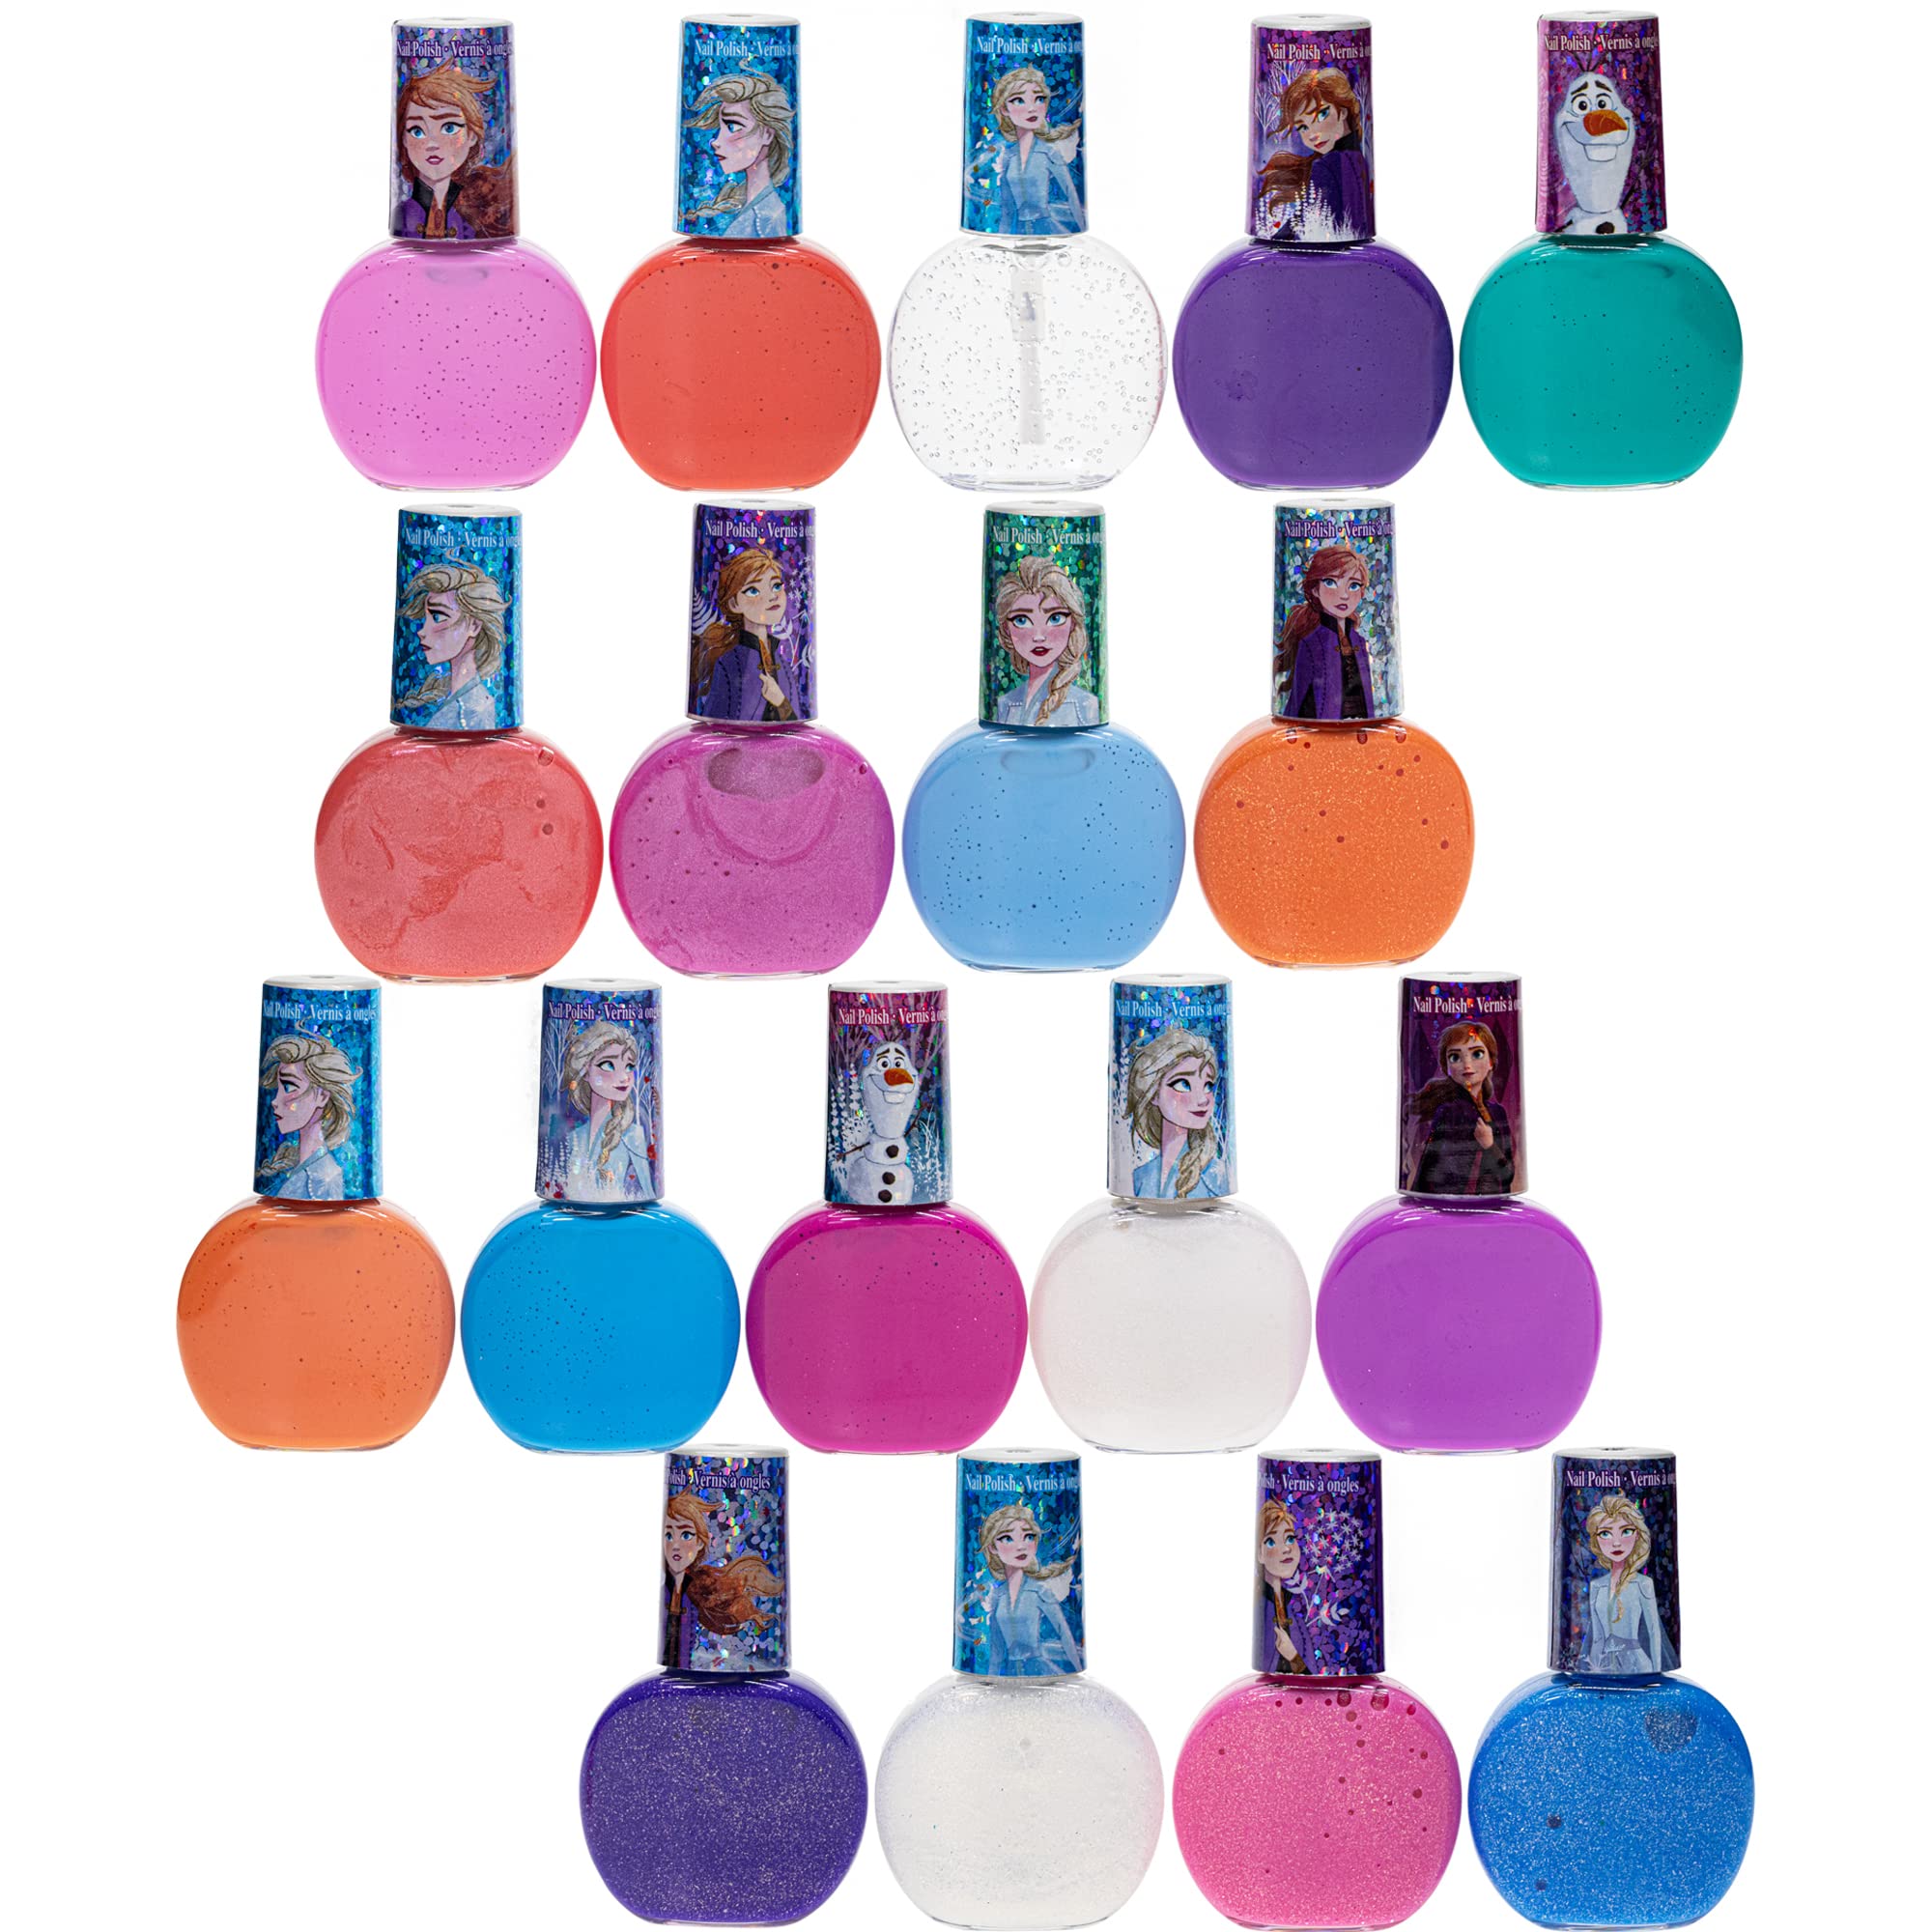 3C4G Three Cheers For Girls Celestial Nail Polish Hexagon - 5 Bottles of  Glittering Polish, Make It Real, Teens Tweens & Girls at Tractor Supply Co.